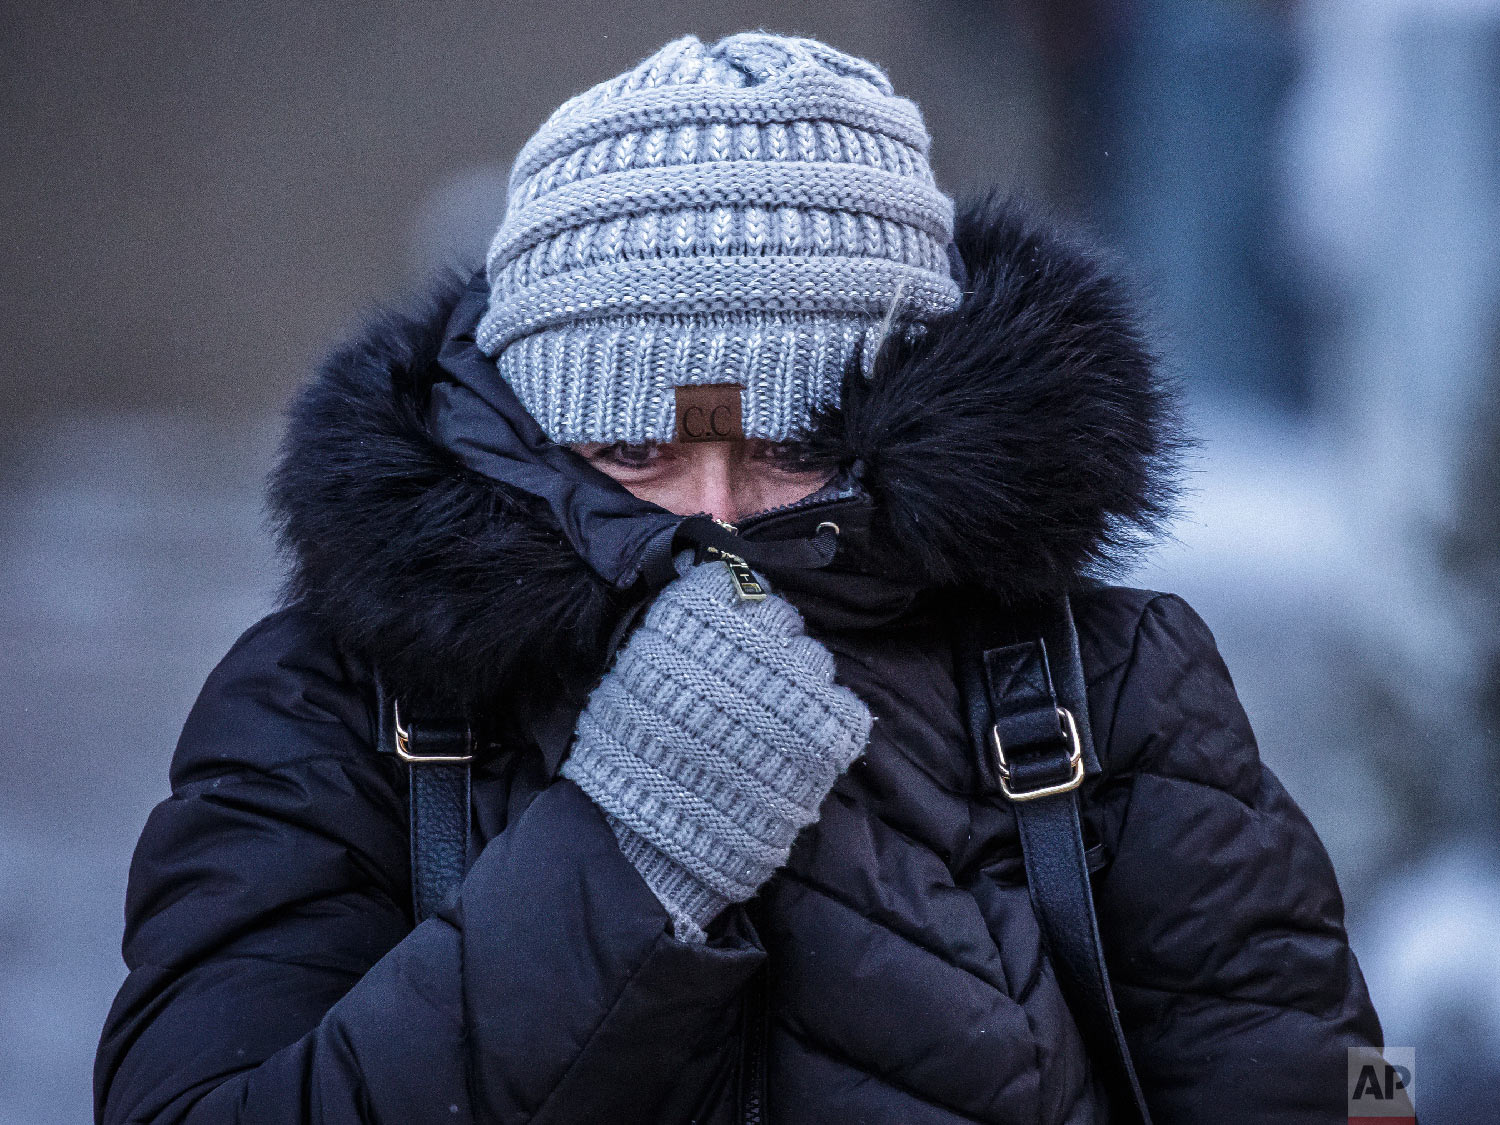  Andrea Billings keeps her face covered while walking across Center Street at its intersection with 1st Avenue in subzero temperatures on the way to her car after work Tuesday, Jan. 29, 2019, in downtown Rochester, Minn.  (Joe Ahlquist/The Rochester 